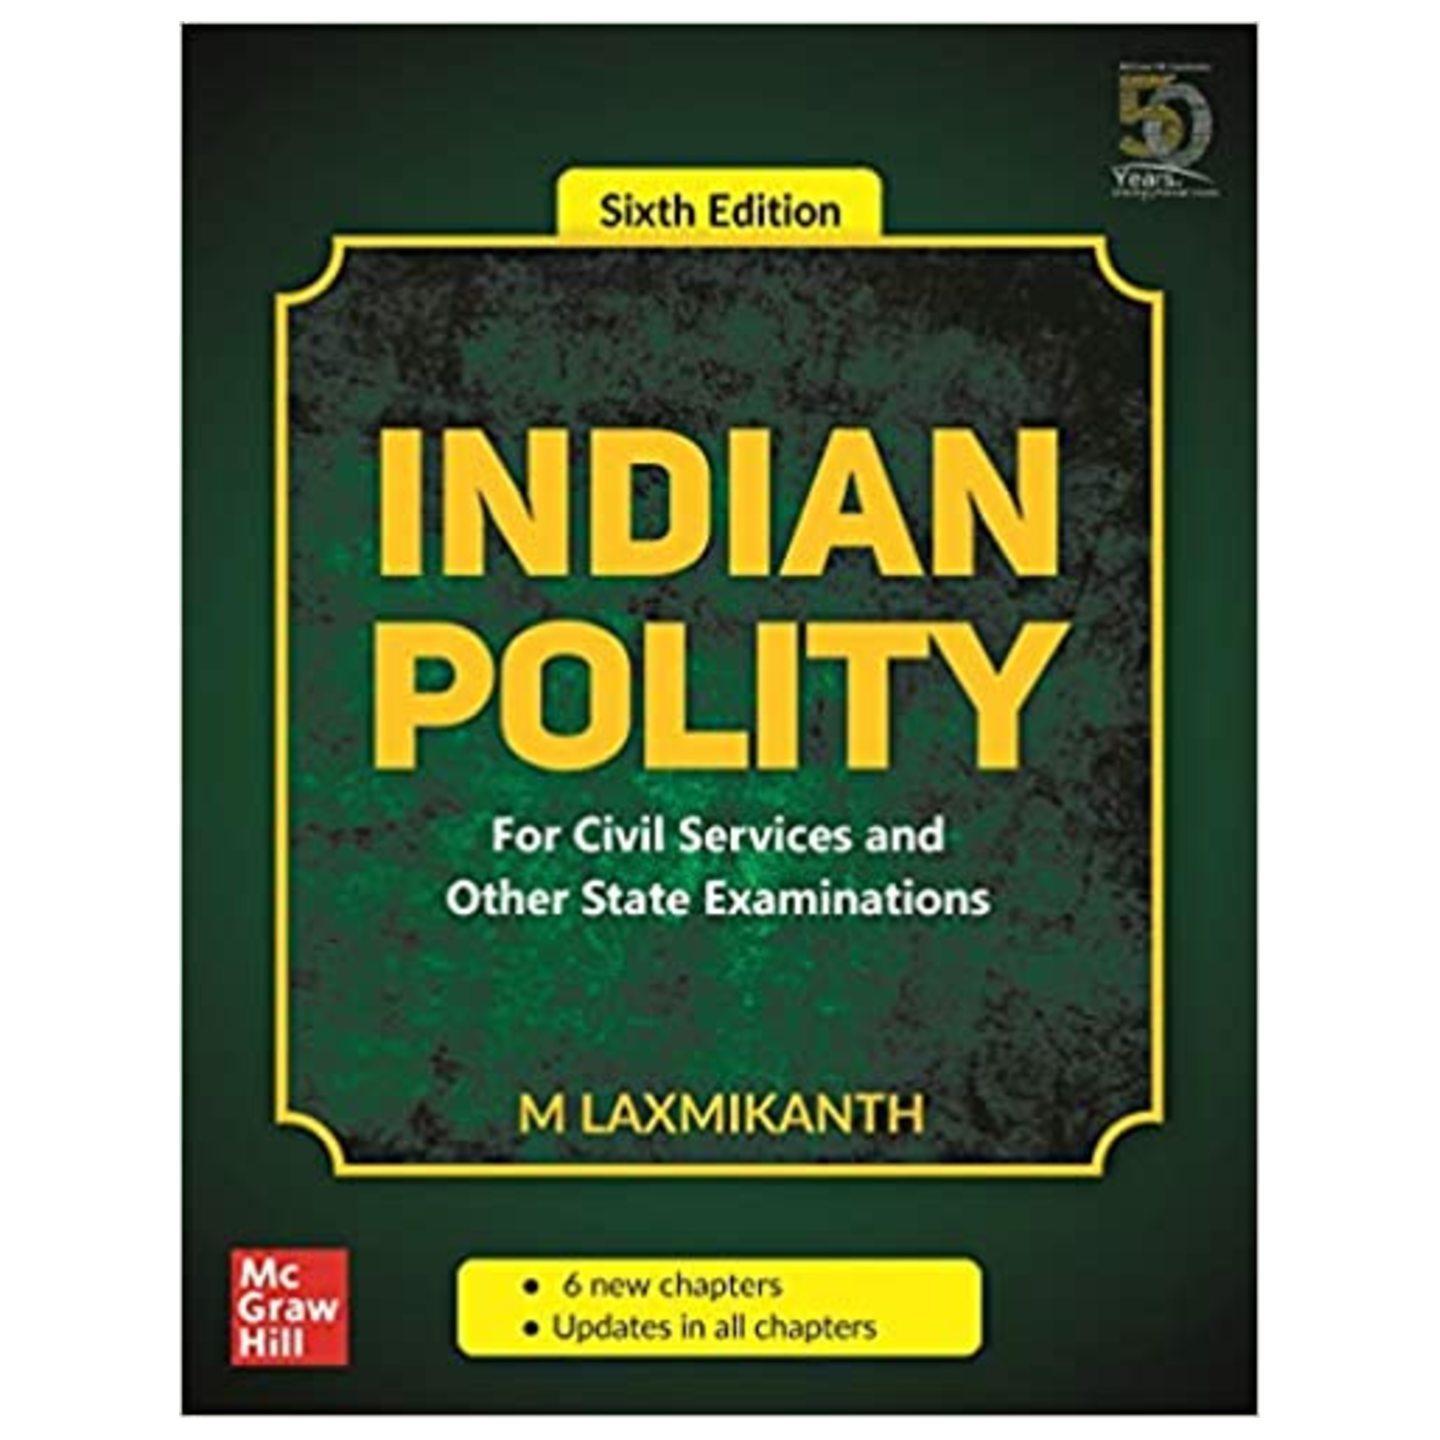 MCGRAWHILL Indian Polity - For Civil Services and Other State Examinations M. LAXMIKANTH